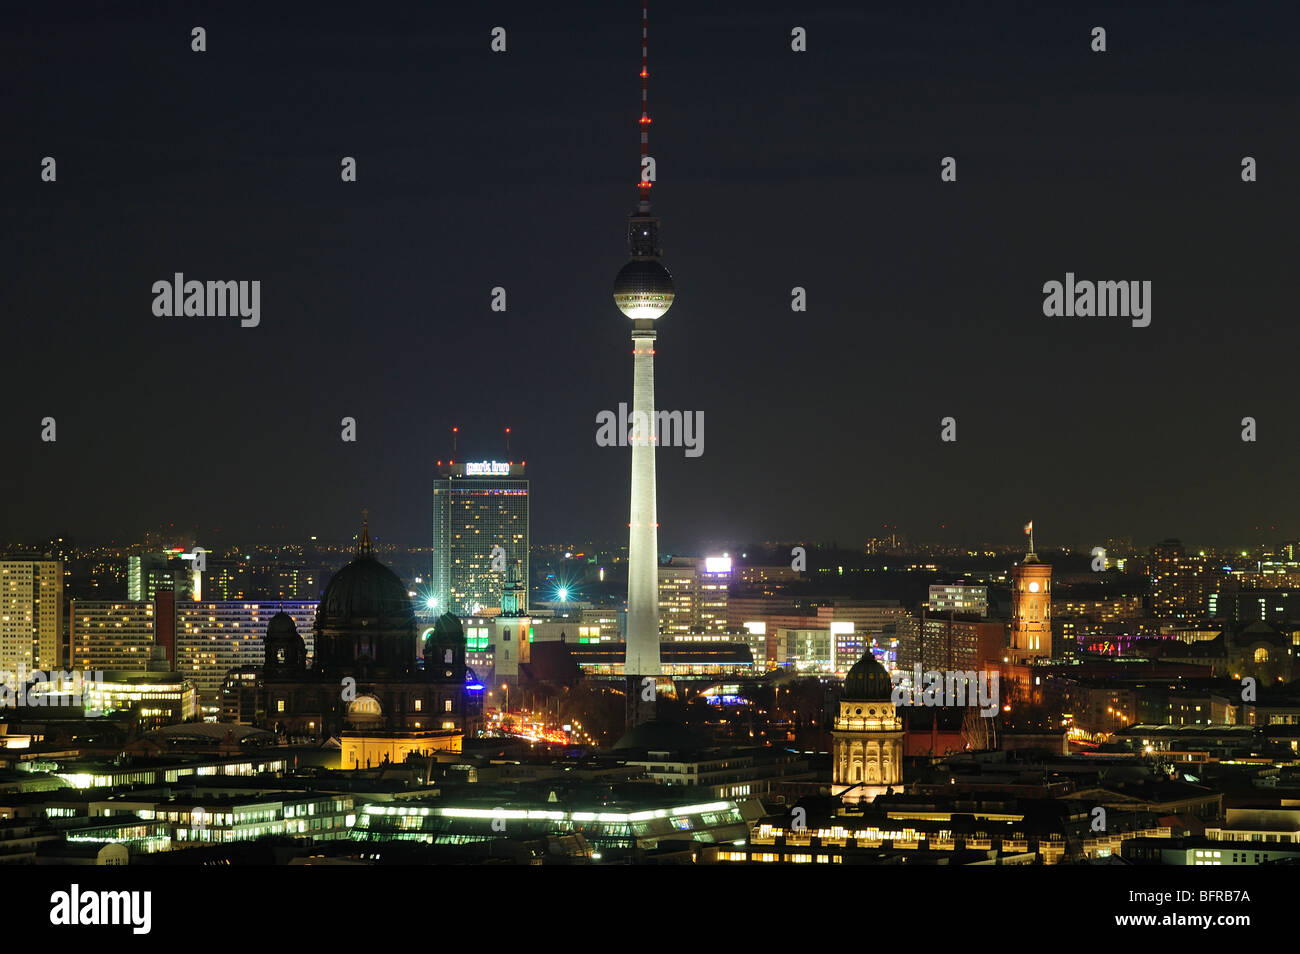 Panorama of the nighttime skyline of Berlin with Fernsehturm, television tower, Berliner Dom, Berlin, Germany. Stock Photo